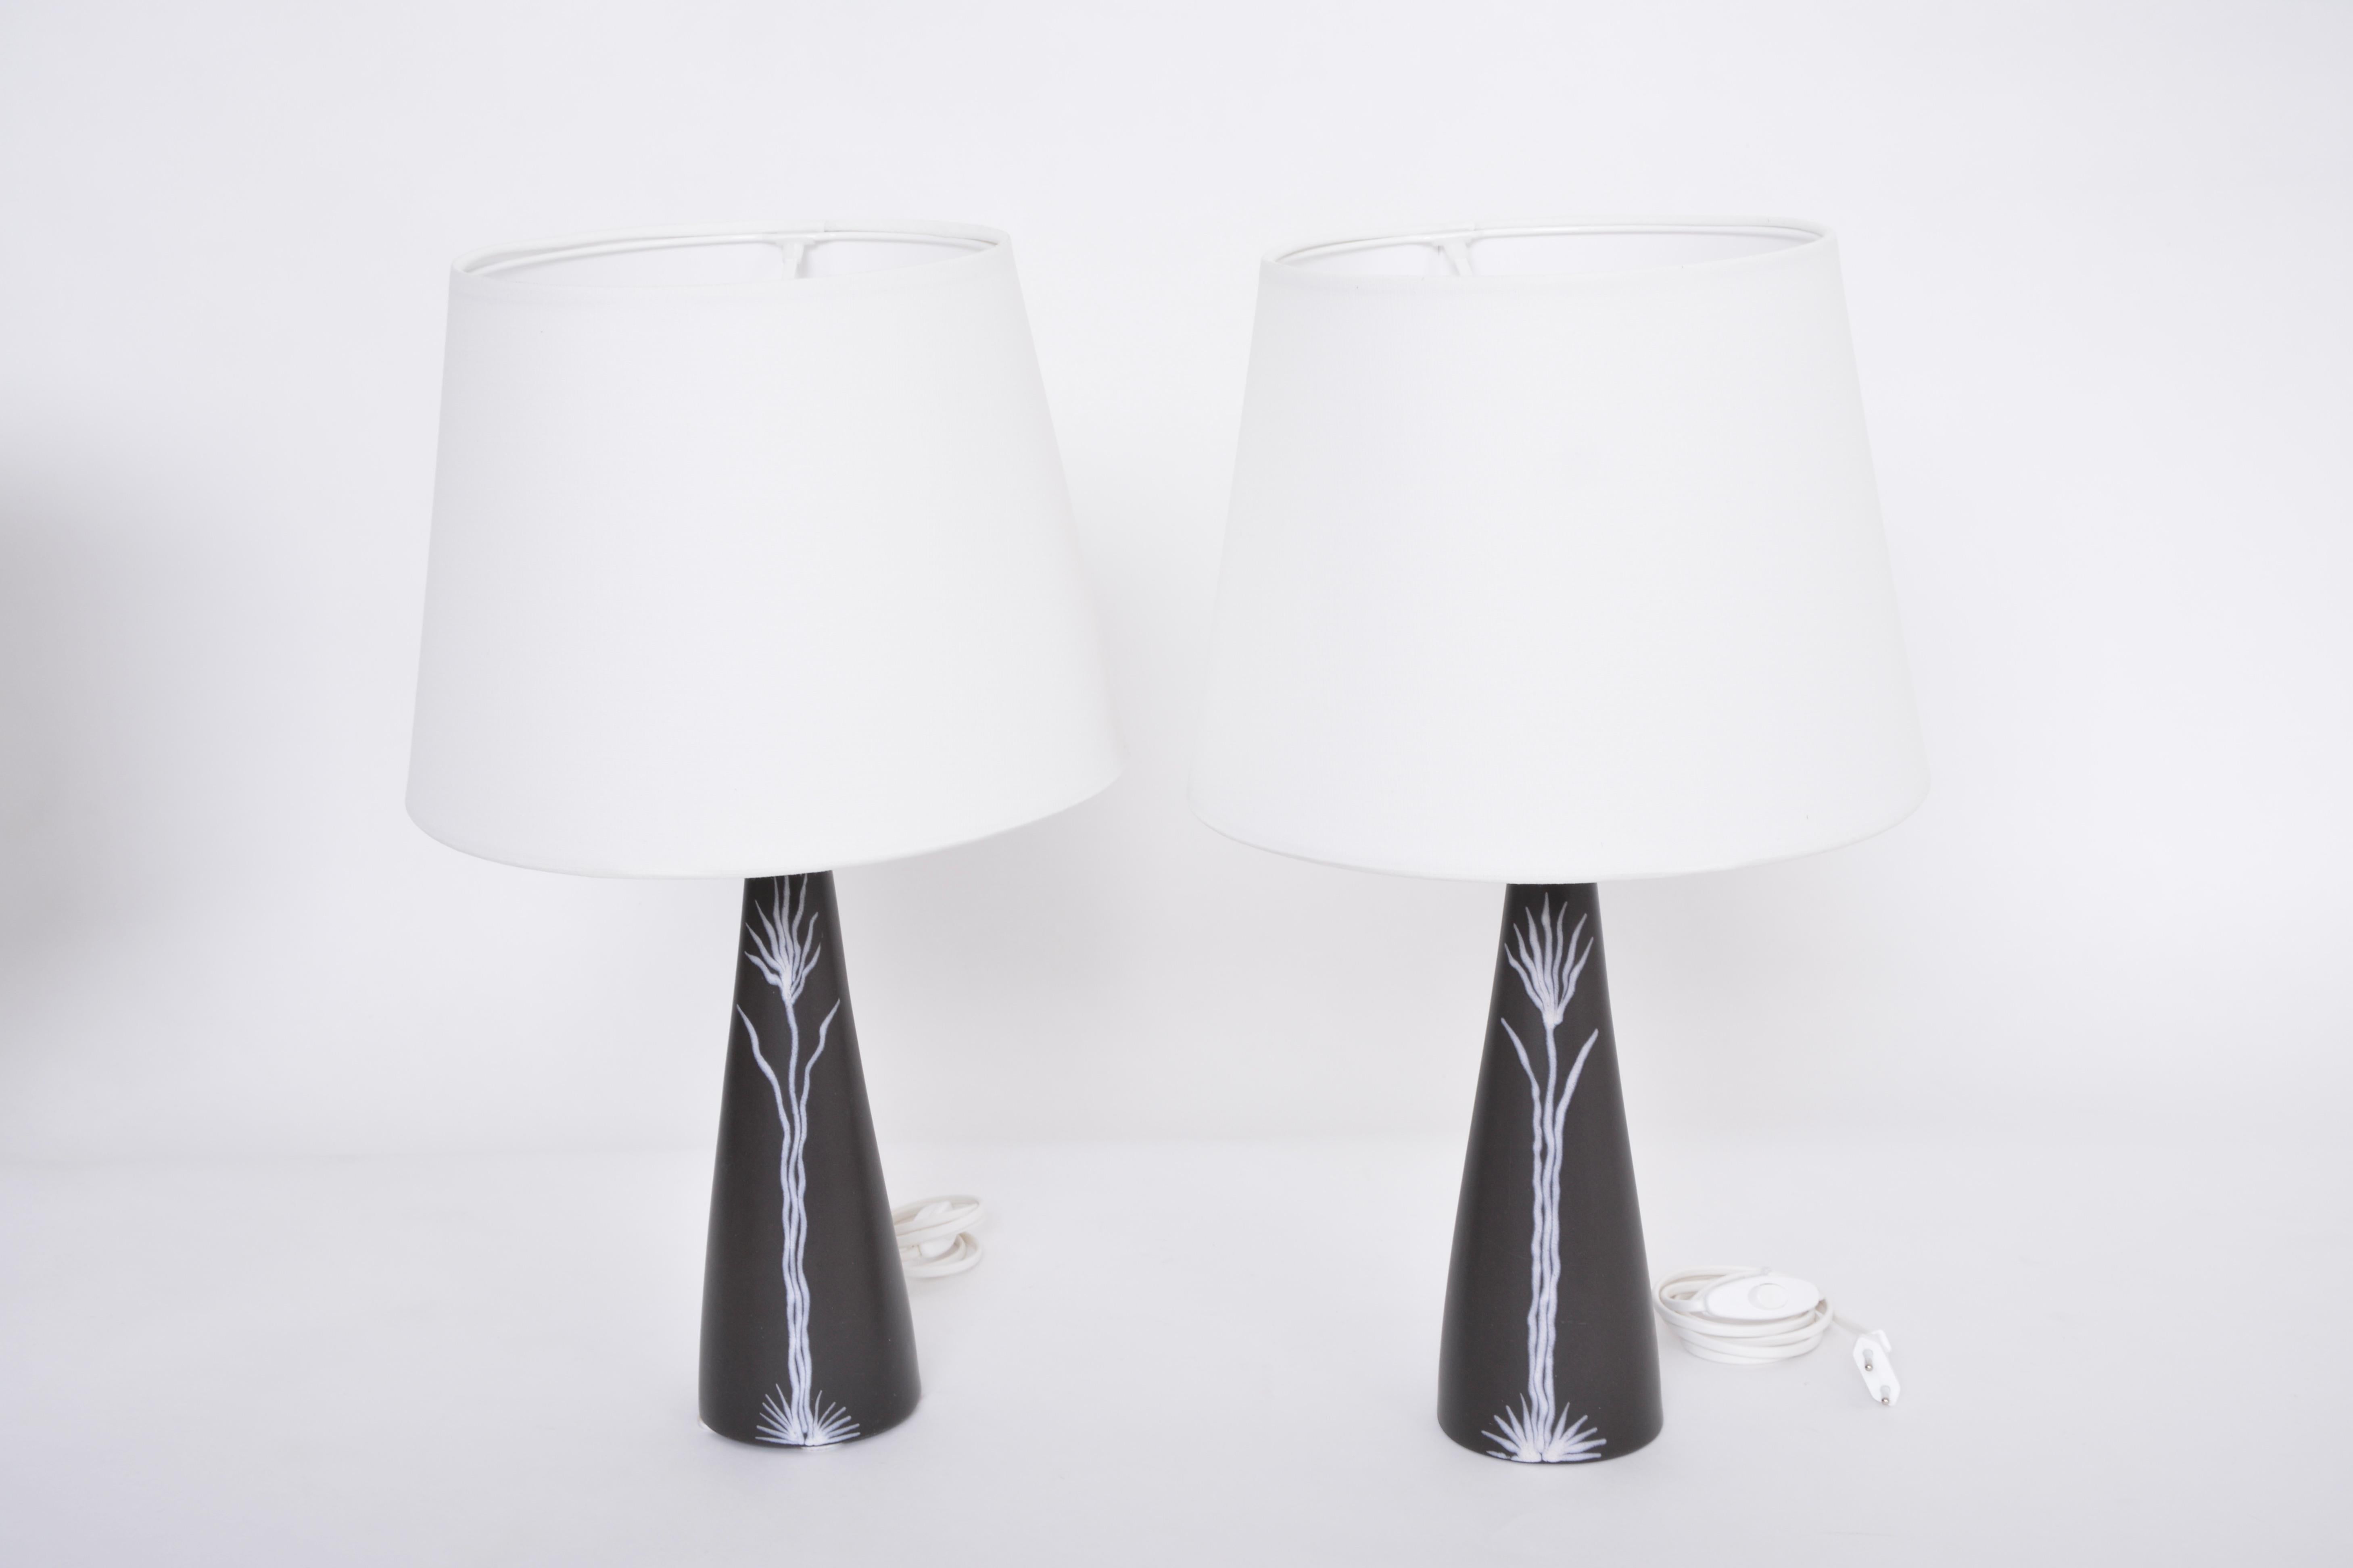 Pair of Black Danish Midcentury Ceramic Table Lamps by Holm Sorensen for Søholm 2